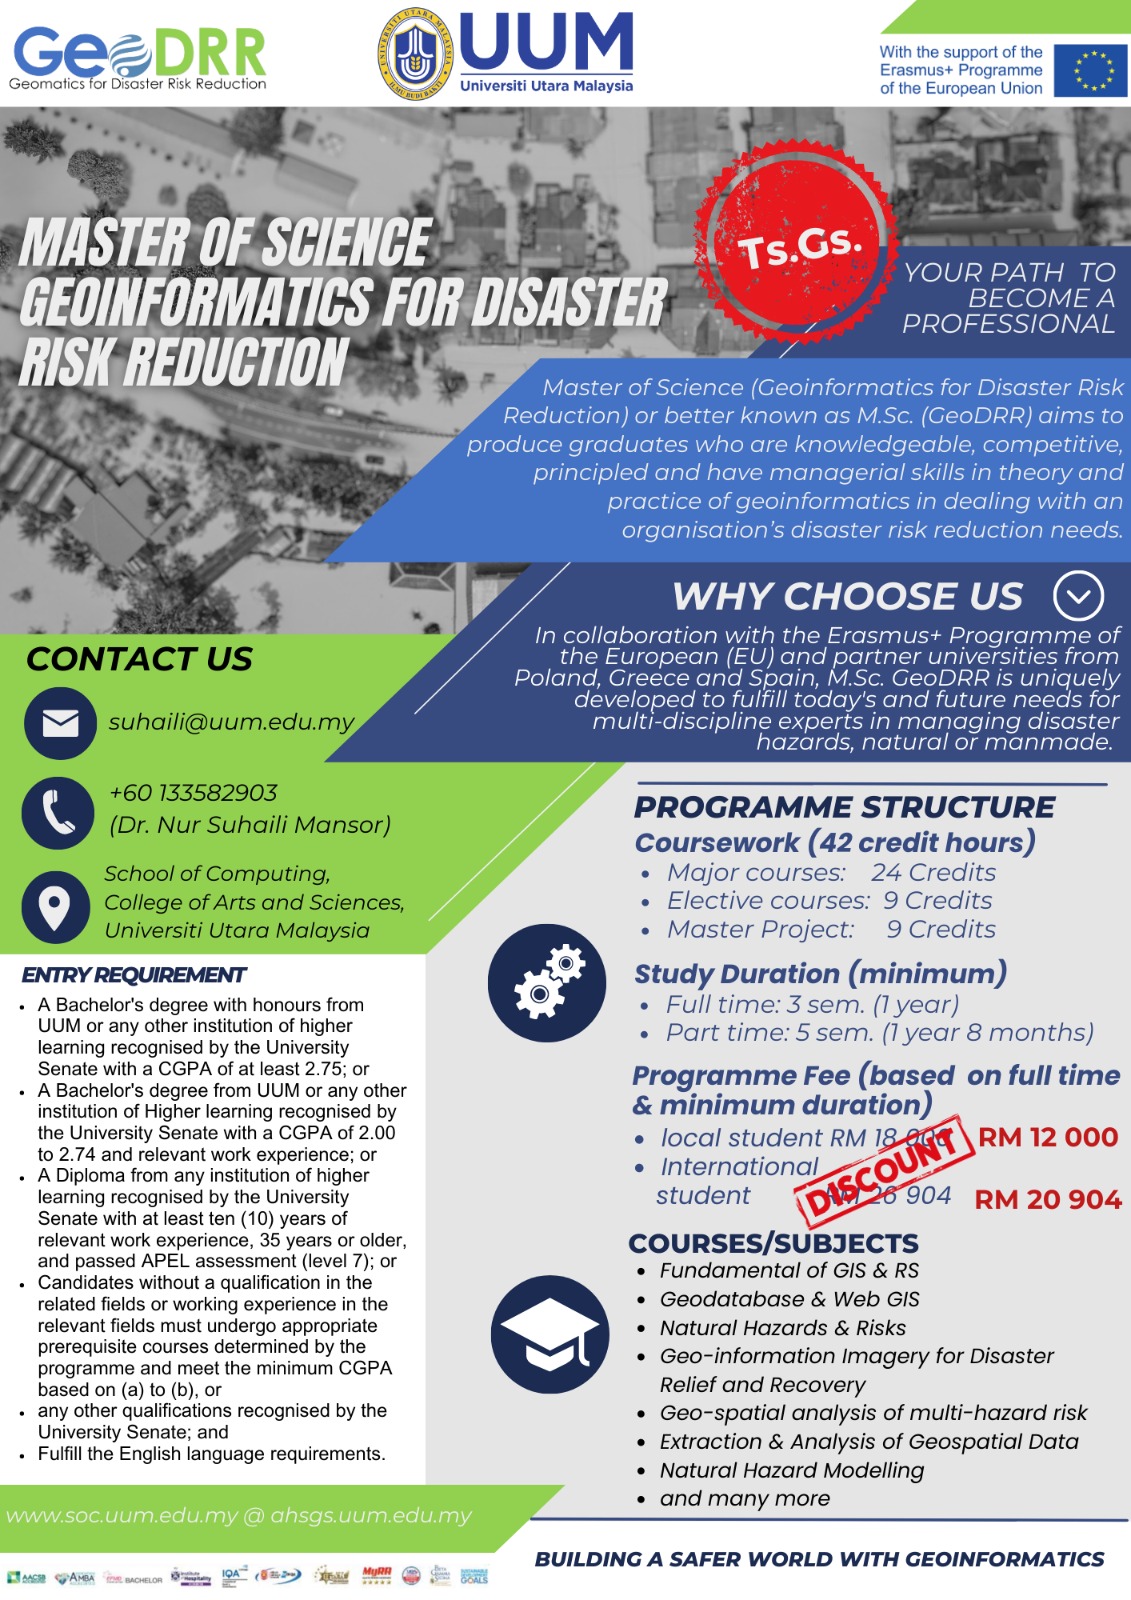 MASTER OF SCIENCE GEOINFORMATICS FOR DISASTER RISK REDUCTION